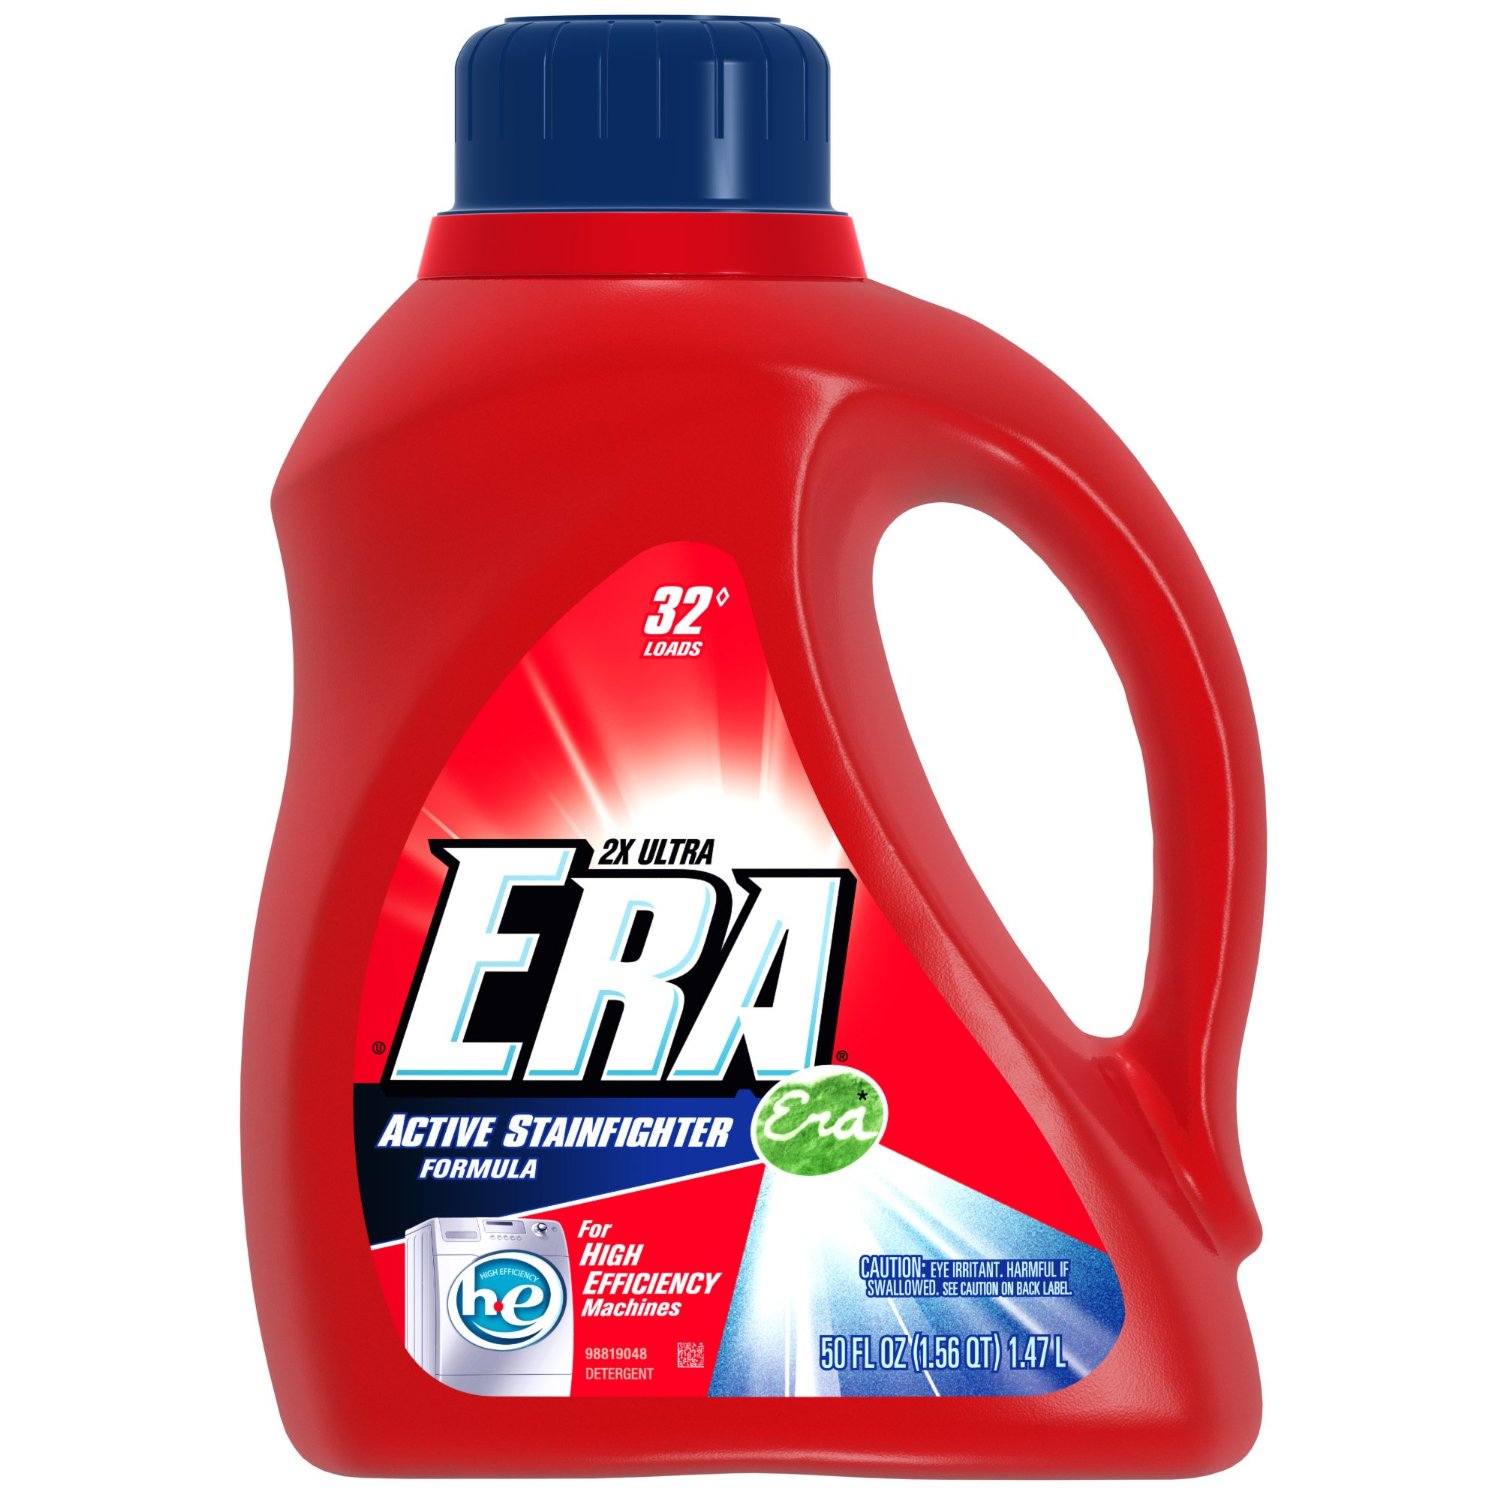 meijer-era-laundry-detergent-only-1-49-11-6-and-11-7-only-become